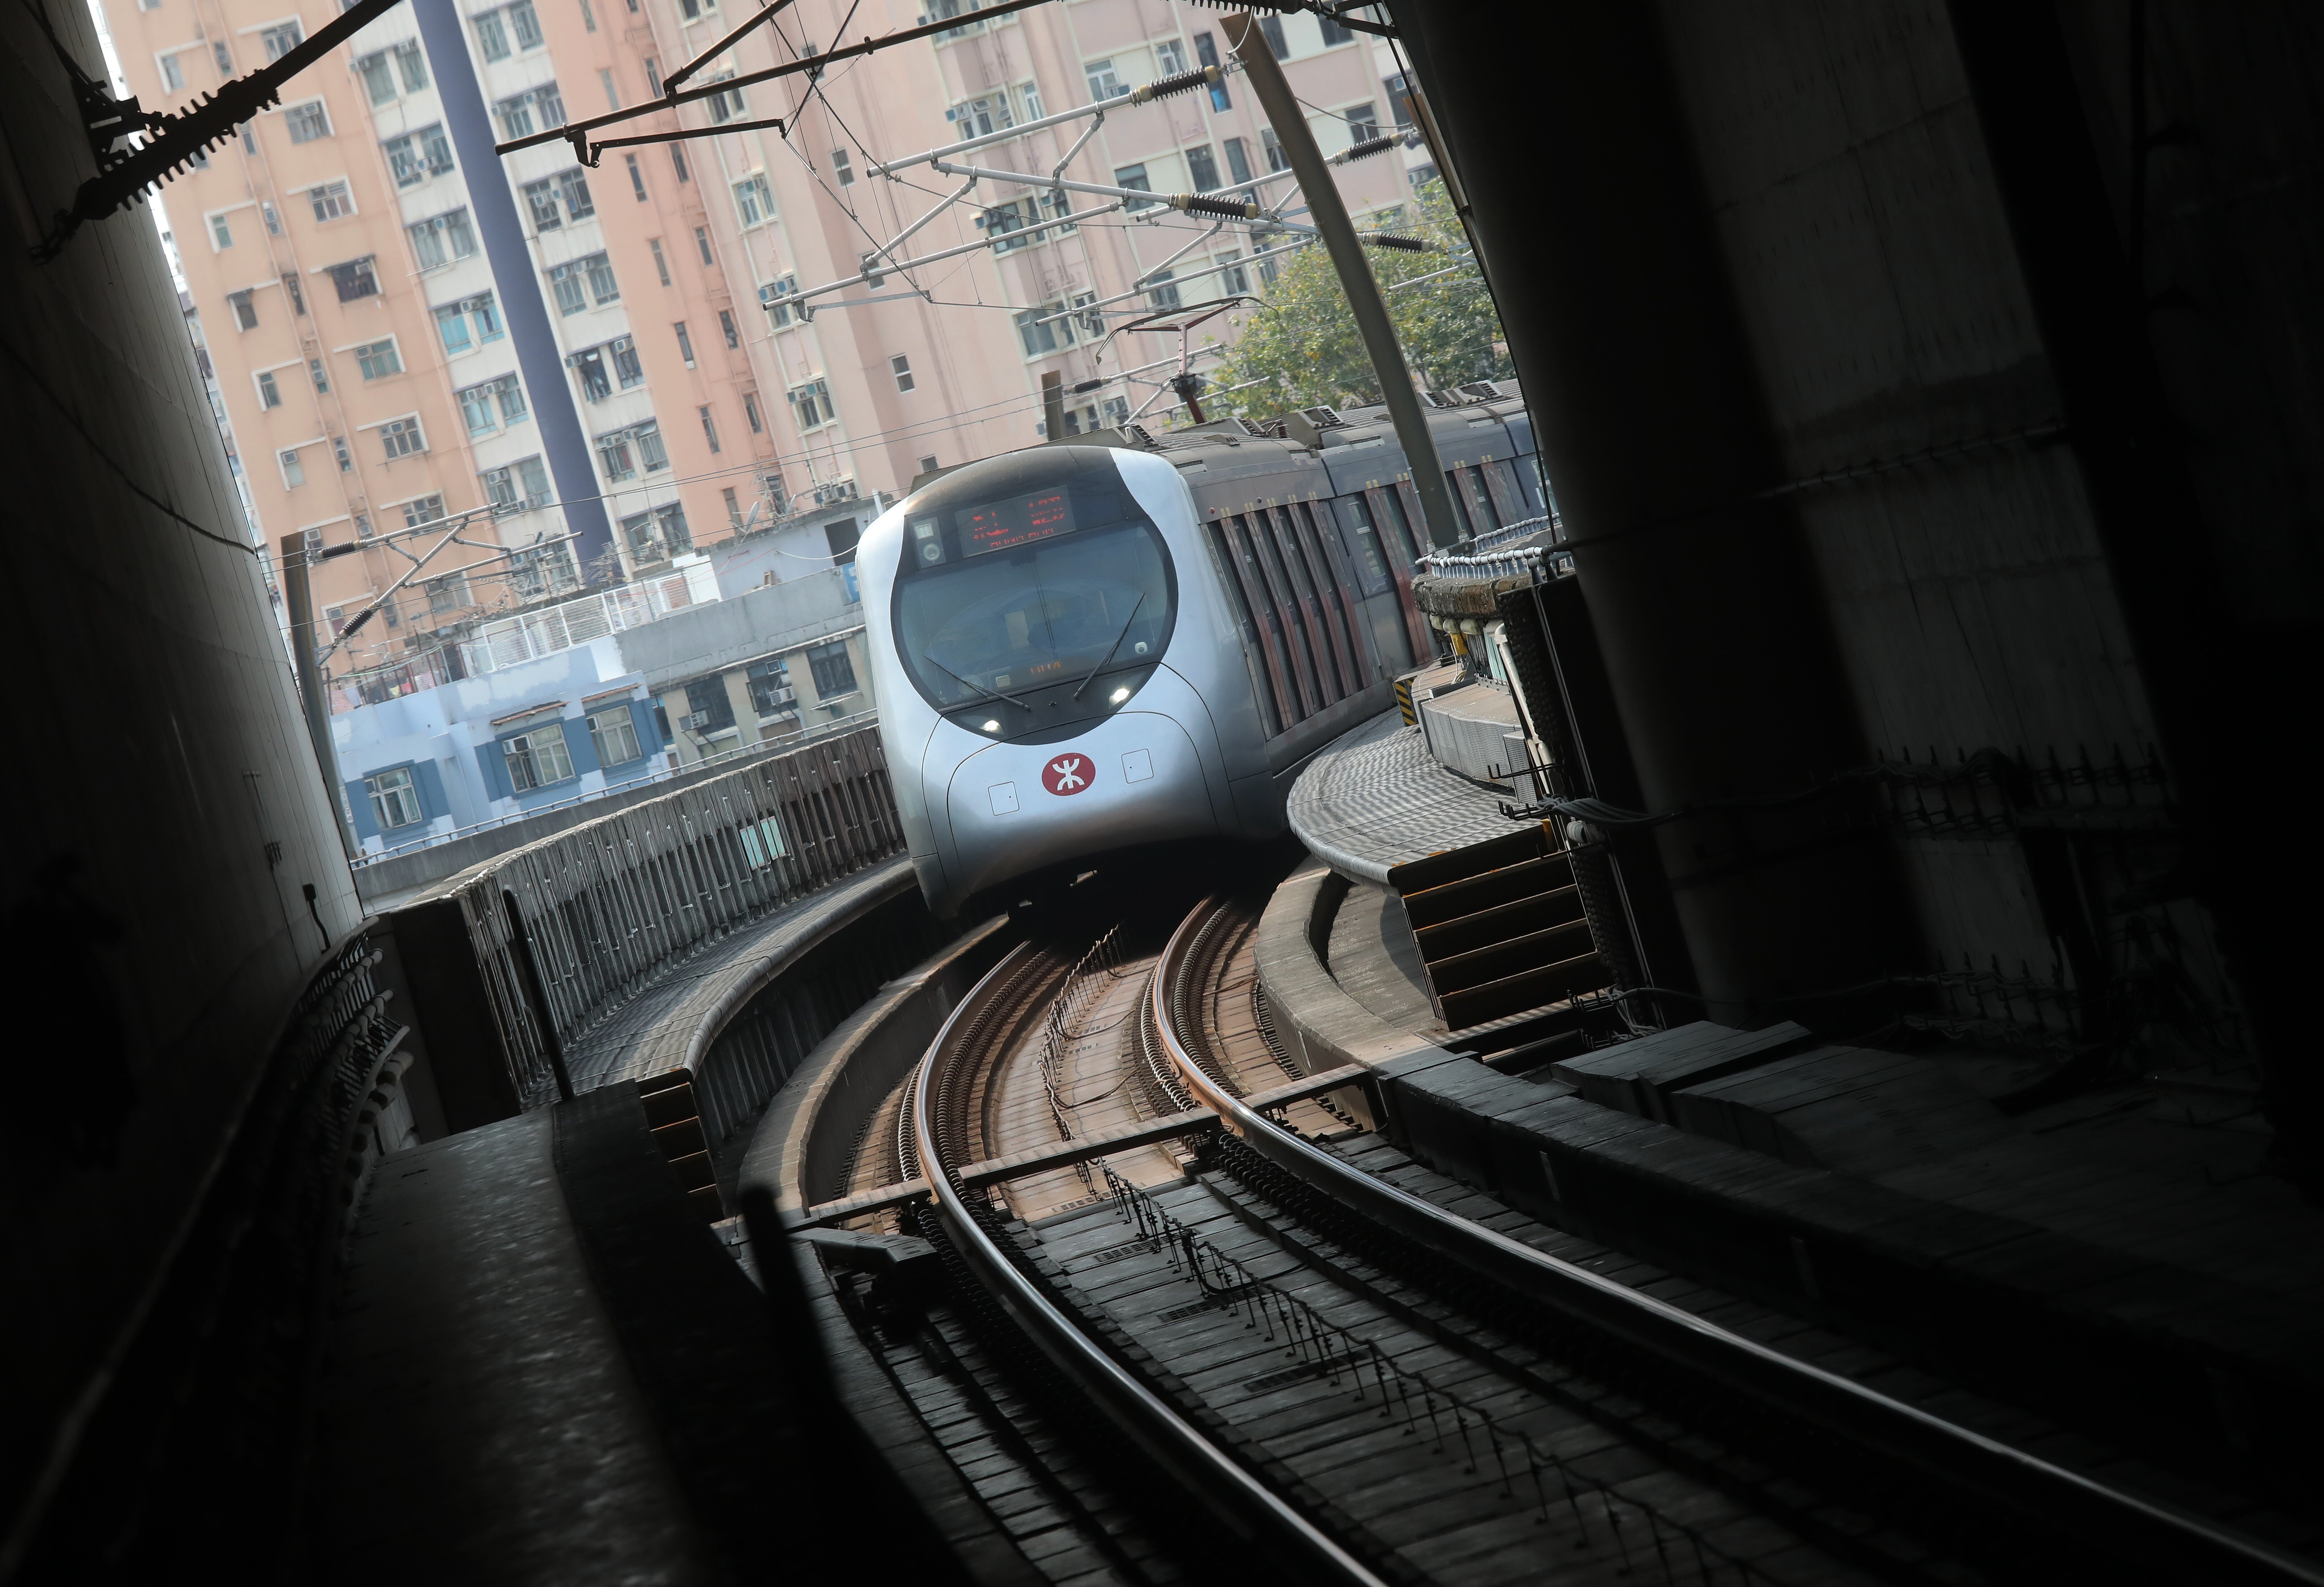 The new rail line would link Hong Kong with Shenzhen’s Qianhai economic zone. Photo: K. Y. Cheng